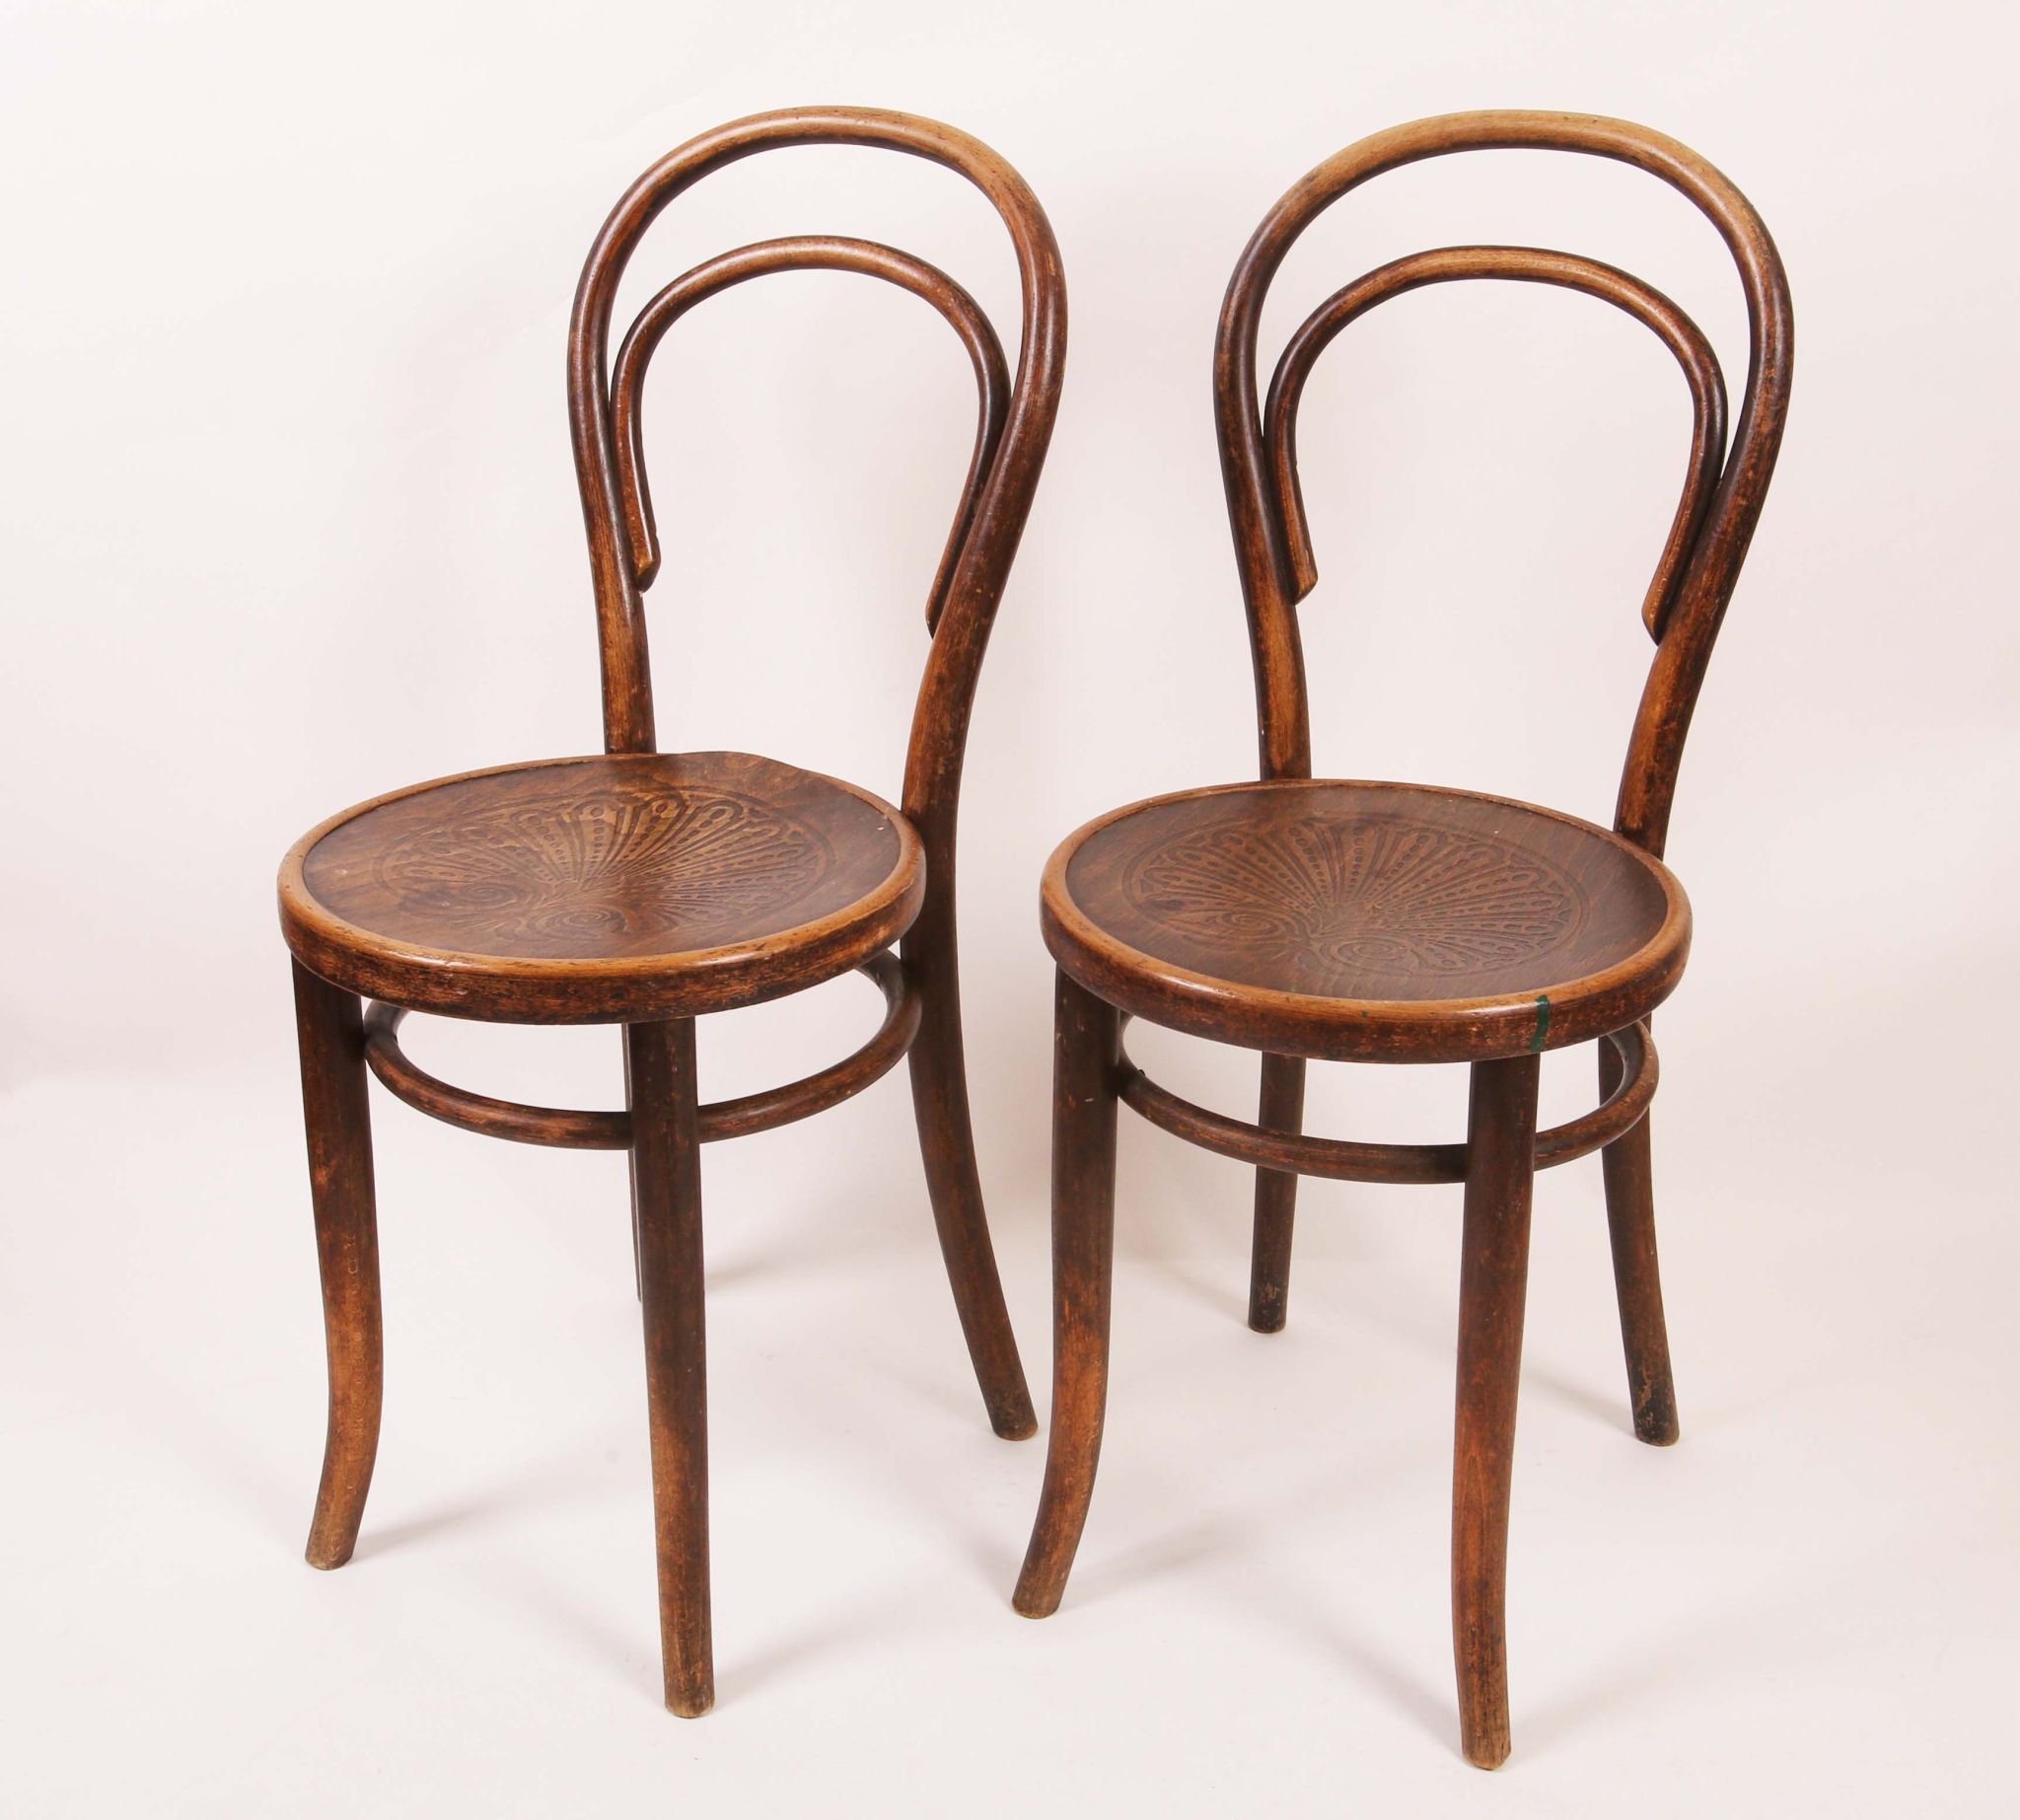 A set of six Thonet bentwood chairs, with paper labels under some chairs. (6)